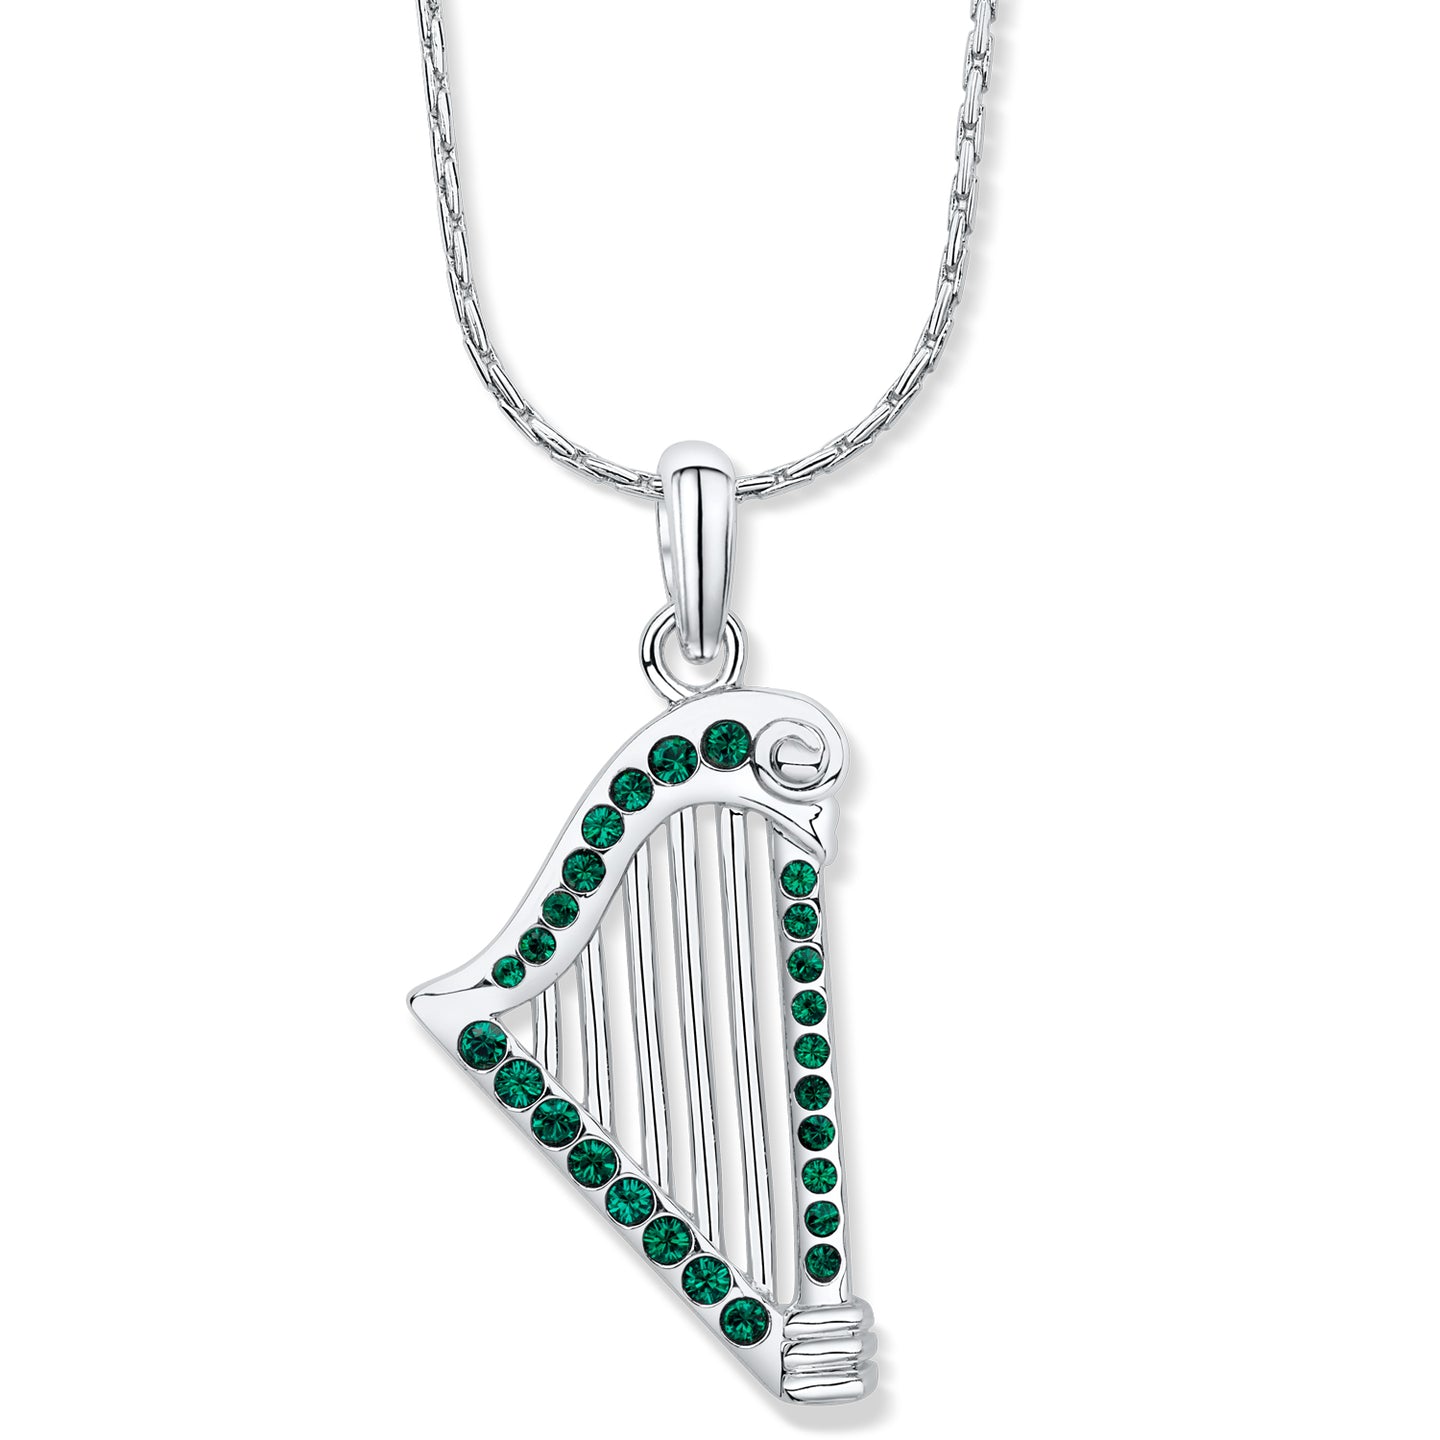 Harp Pendant with Emerald Crystals - Large